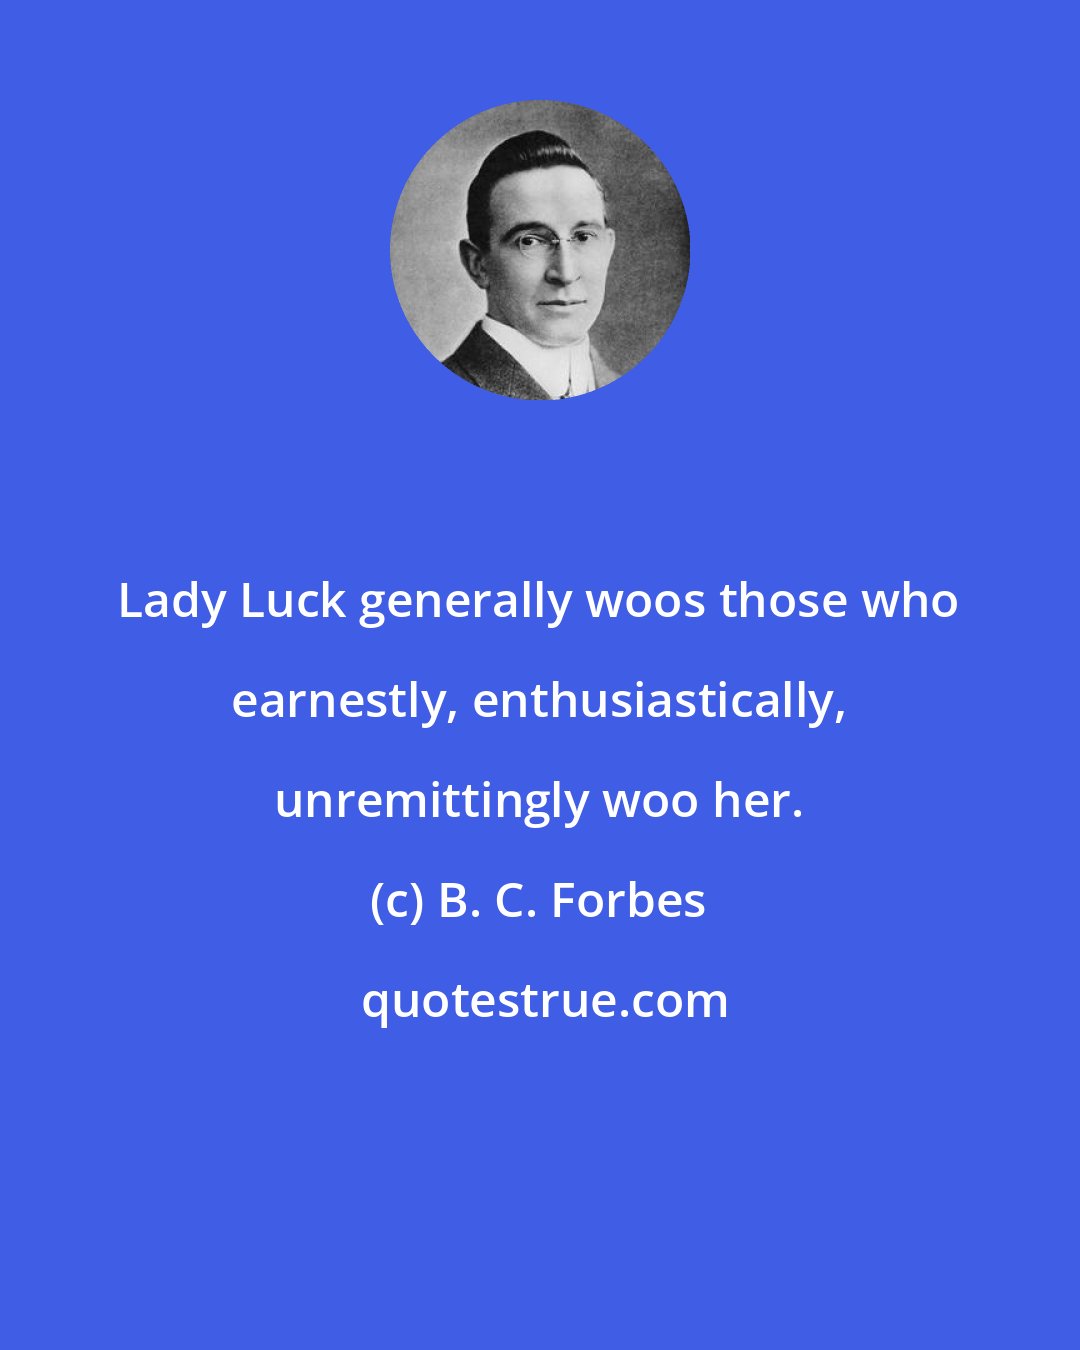 B. C. Forbes: Lady Luck generally woos those who earnestly, enthusiastically, unremittingly woo her.